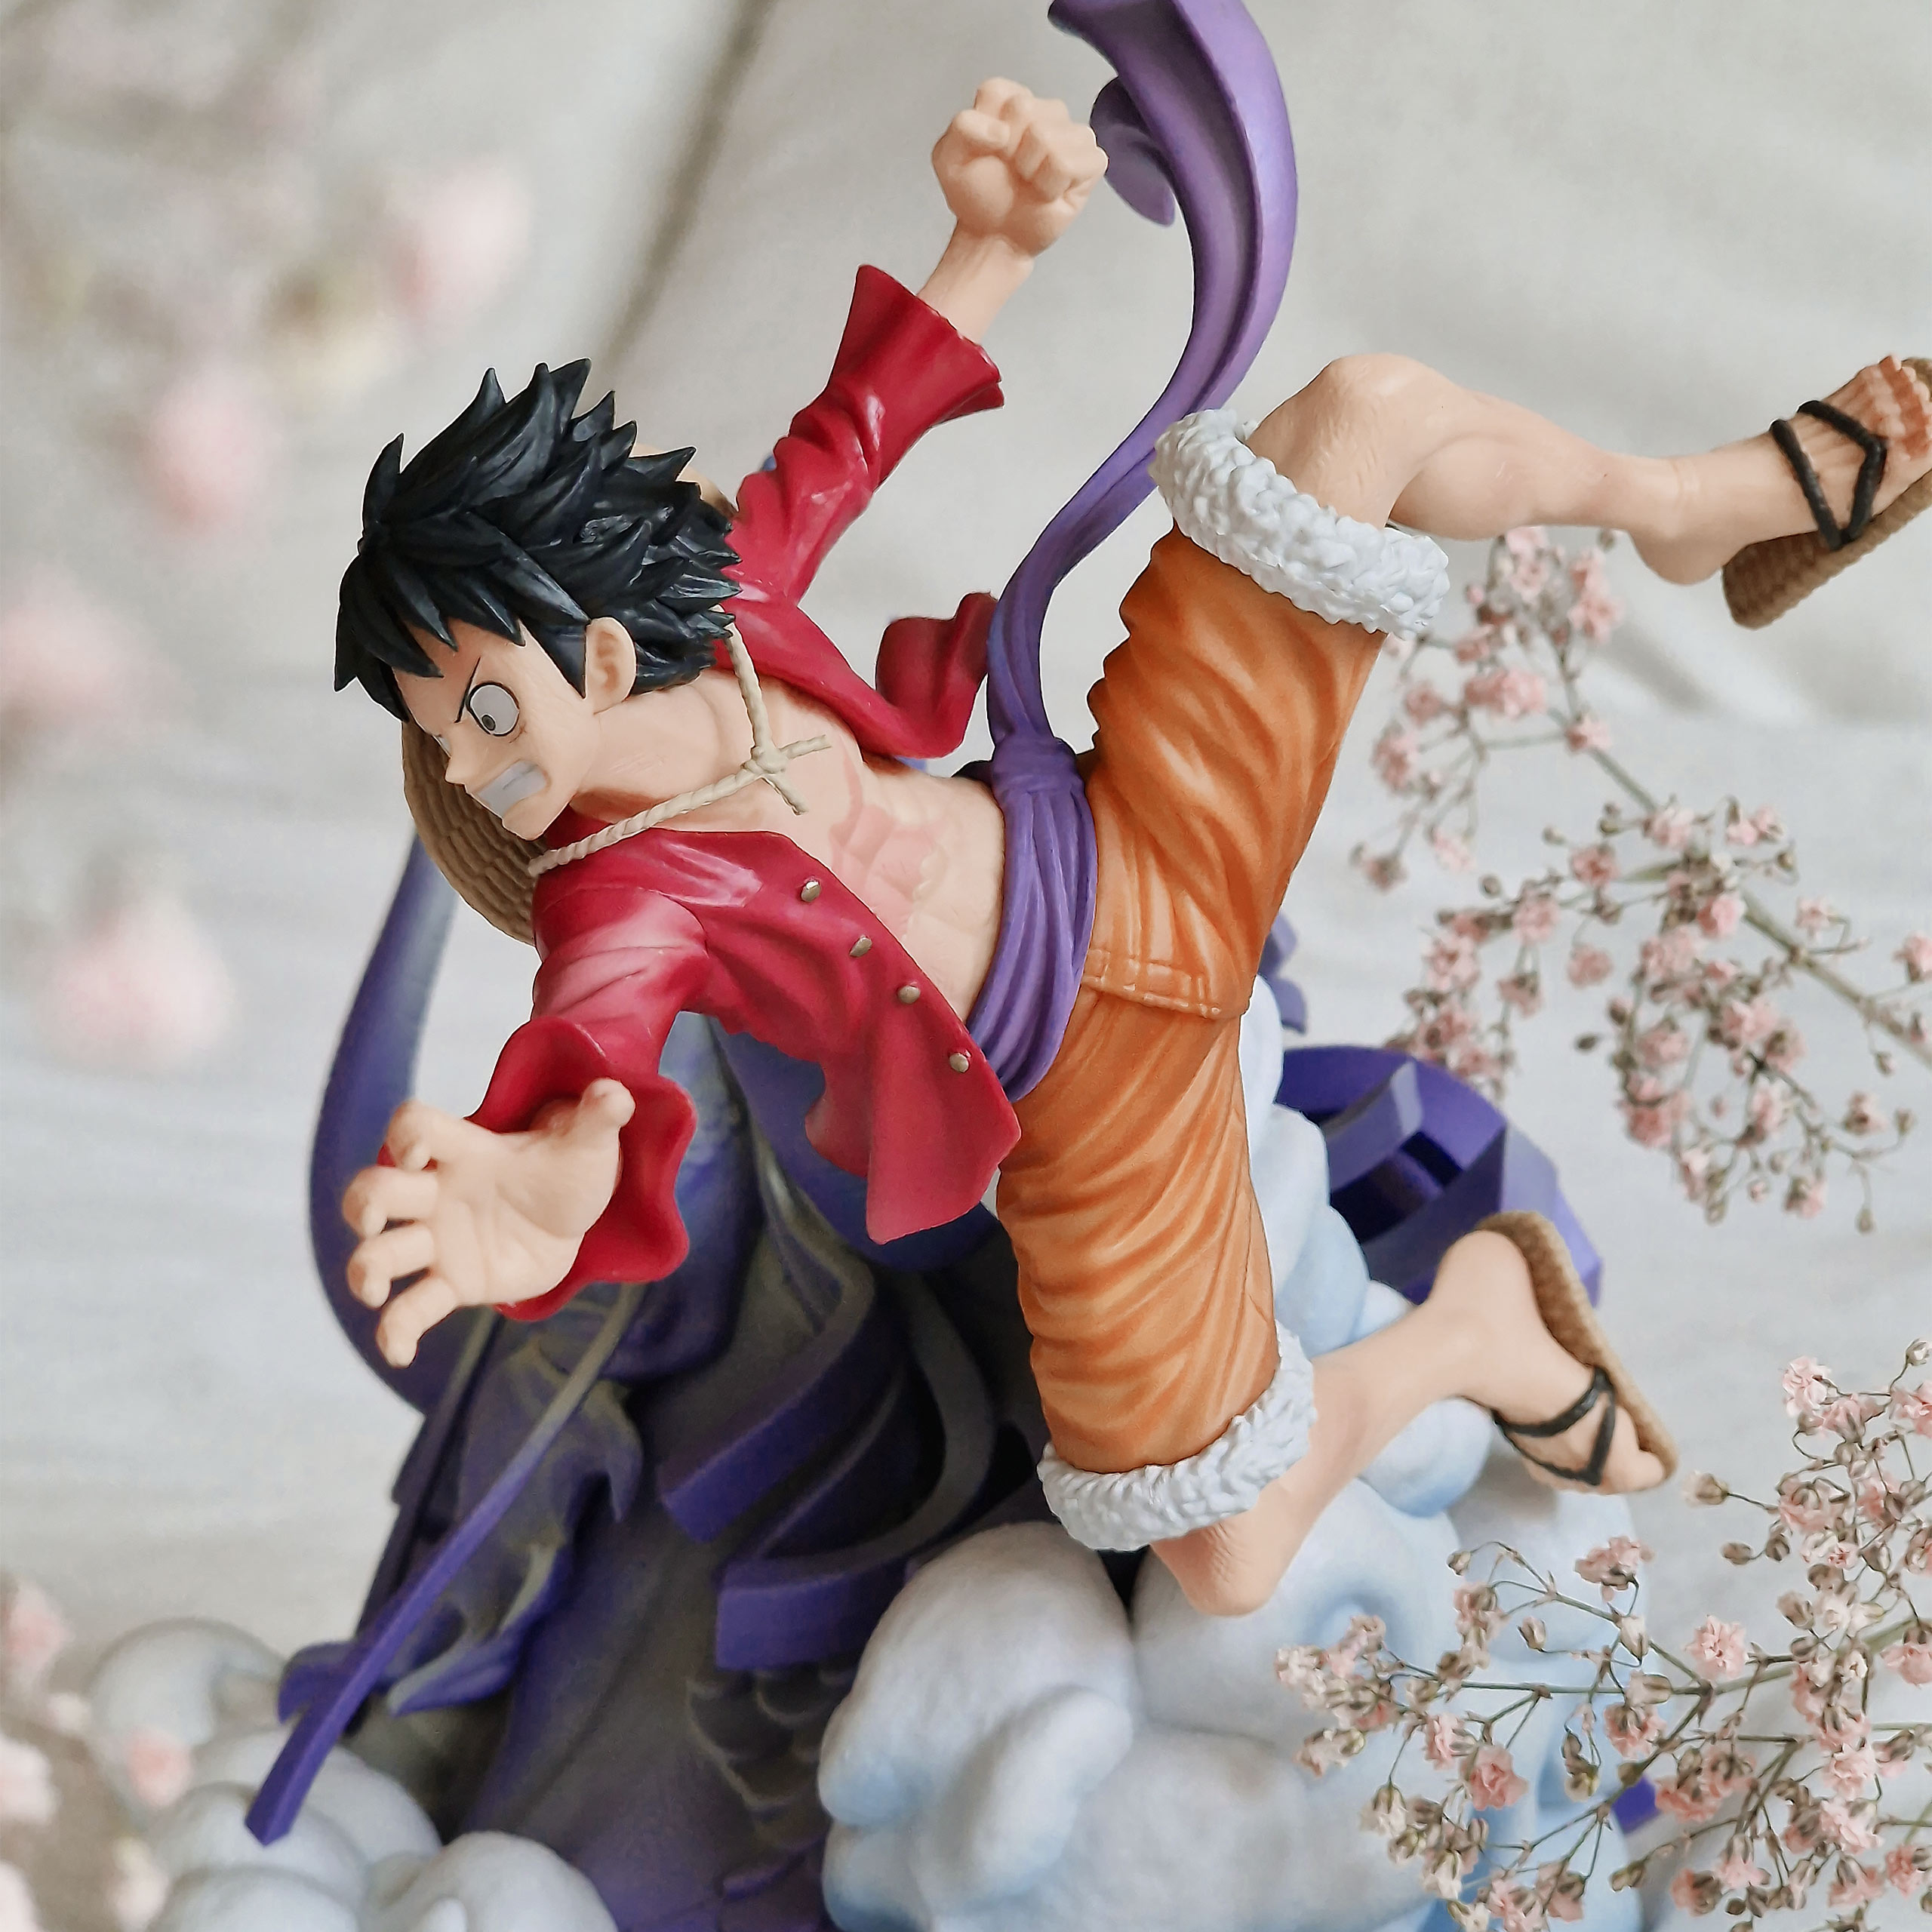 Monkey D. Luffy The Brush Dioramatic Figure - One Piece